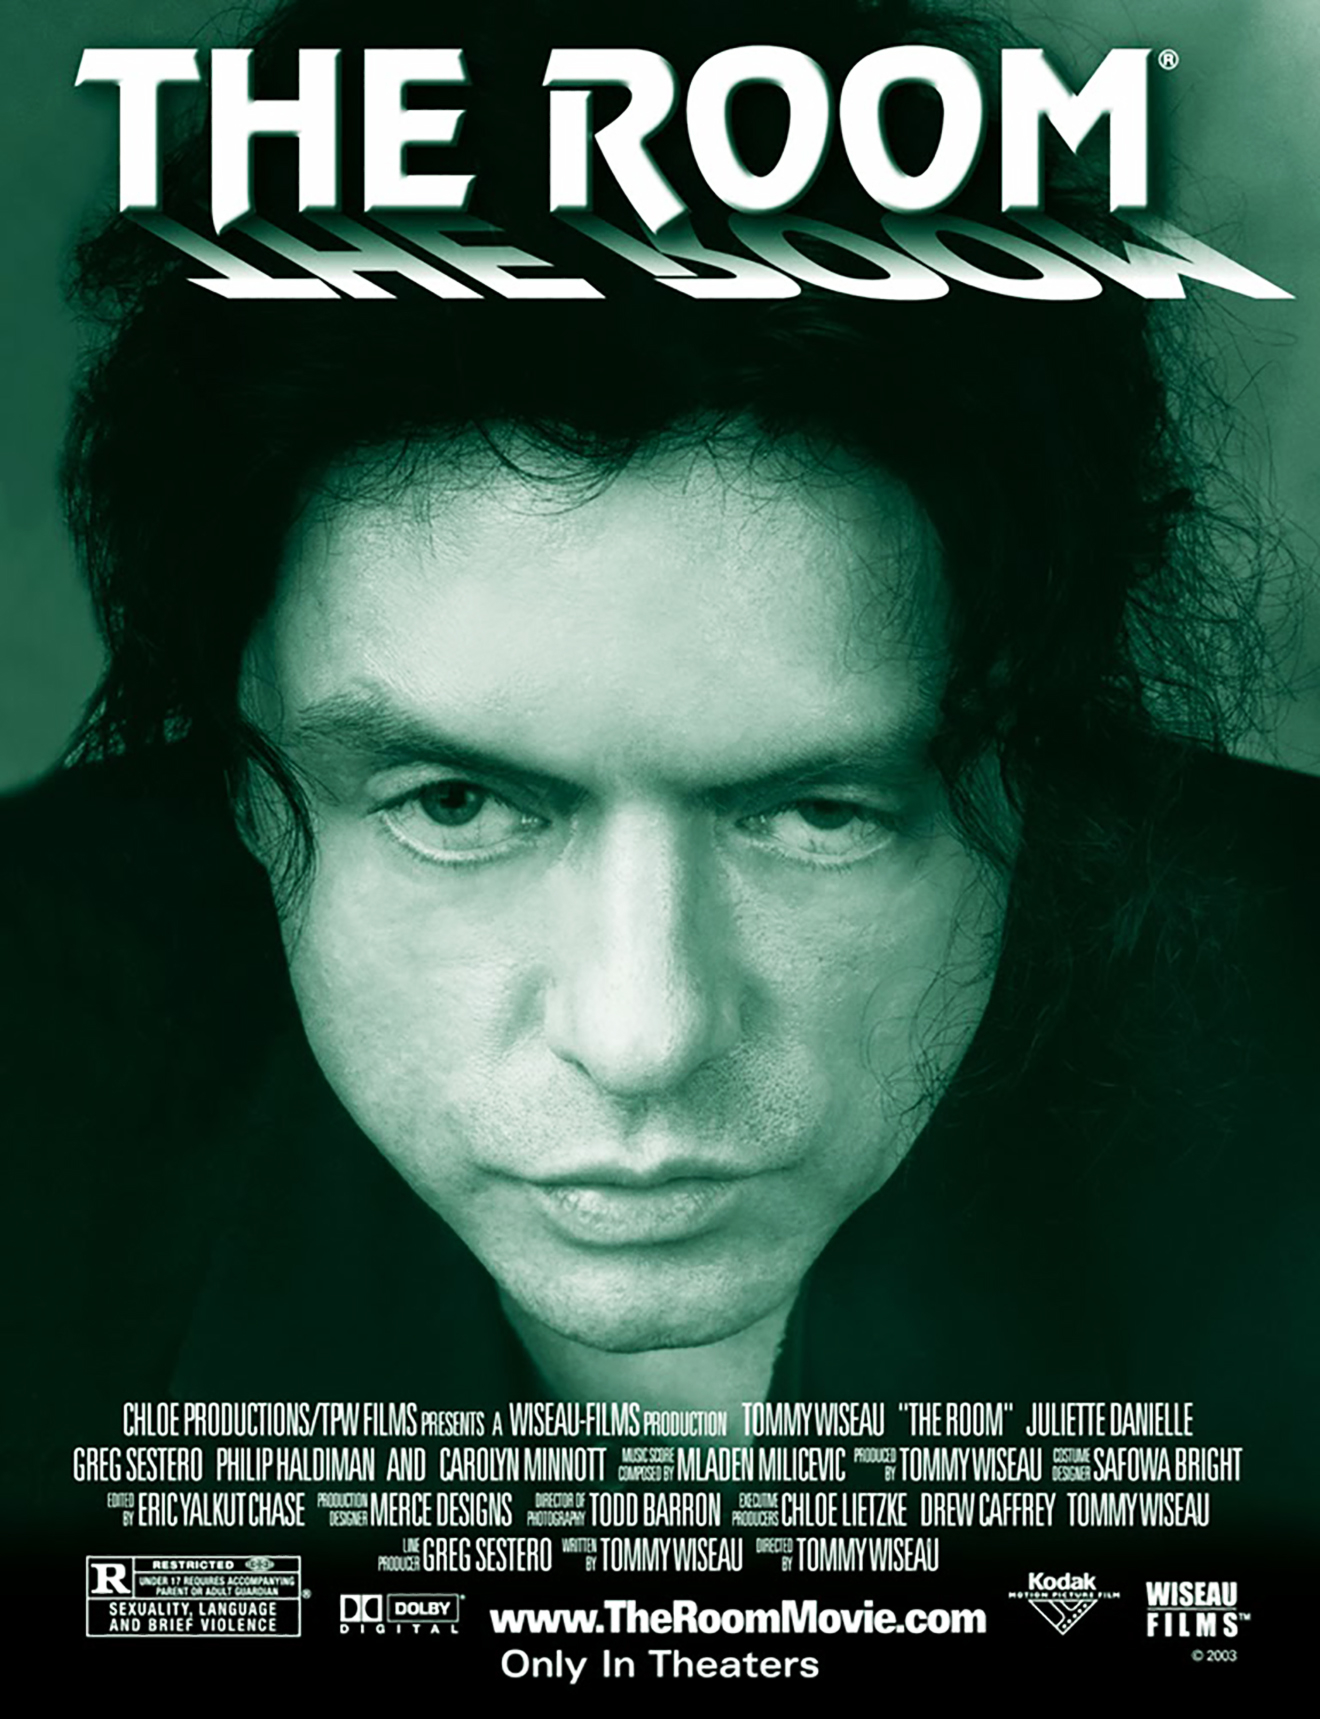 Movie poster for &quot;The Room&quot; featuring Tommy Wiseau with a serious expression. Text includes cast and &quot;Only In Theaters&quot; tagline